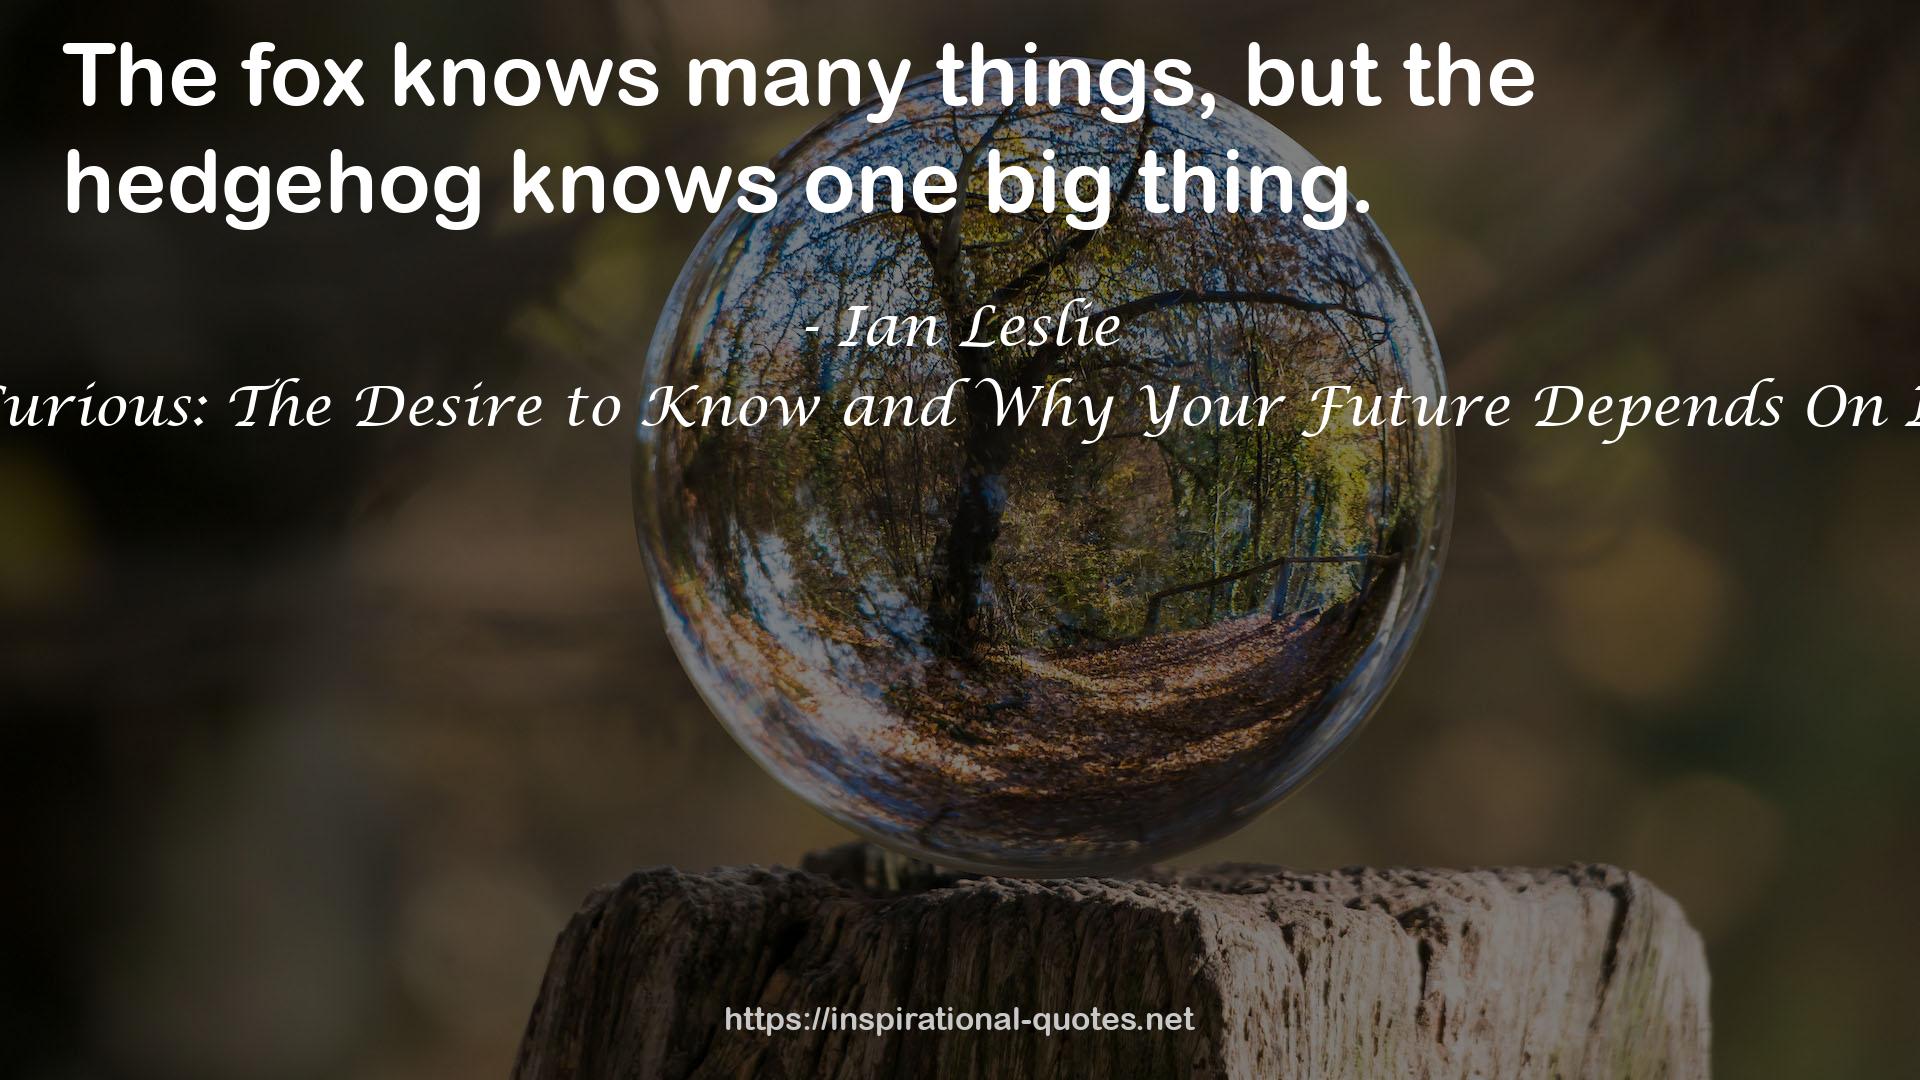 Curious: The Desire to Know and Why Your Future Depends On It QUOTES